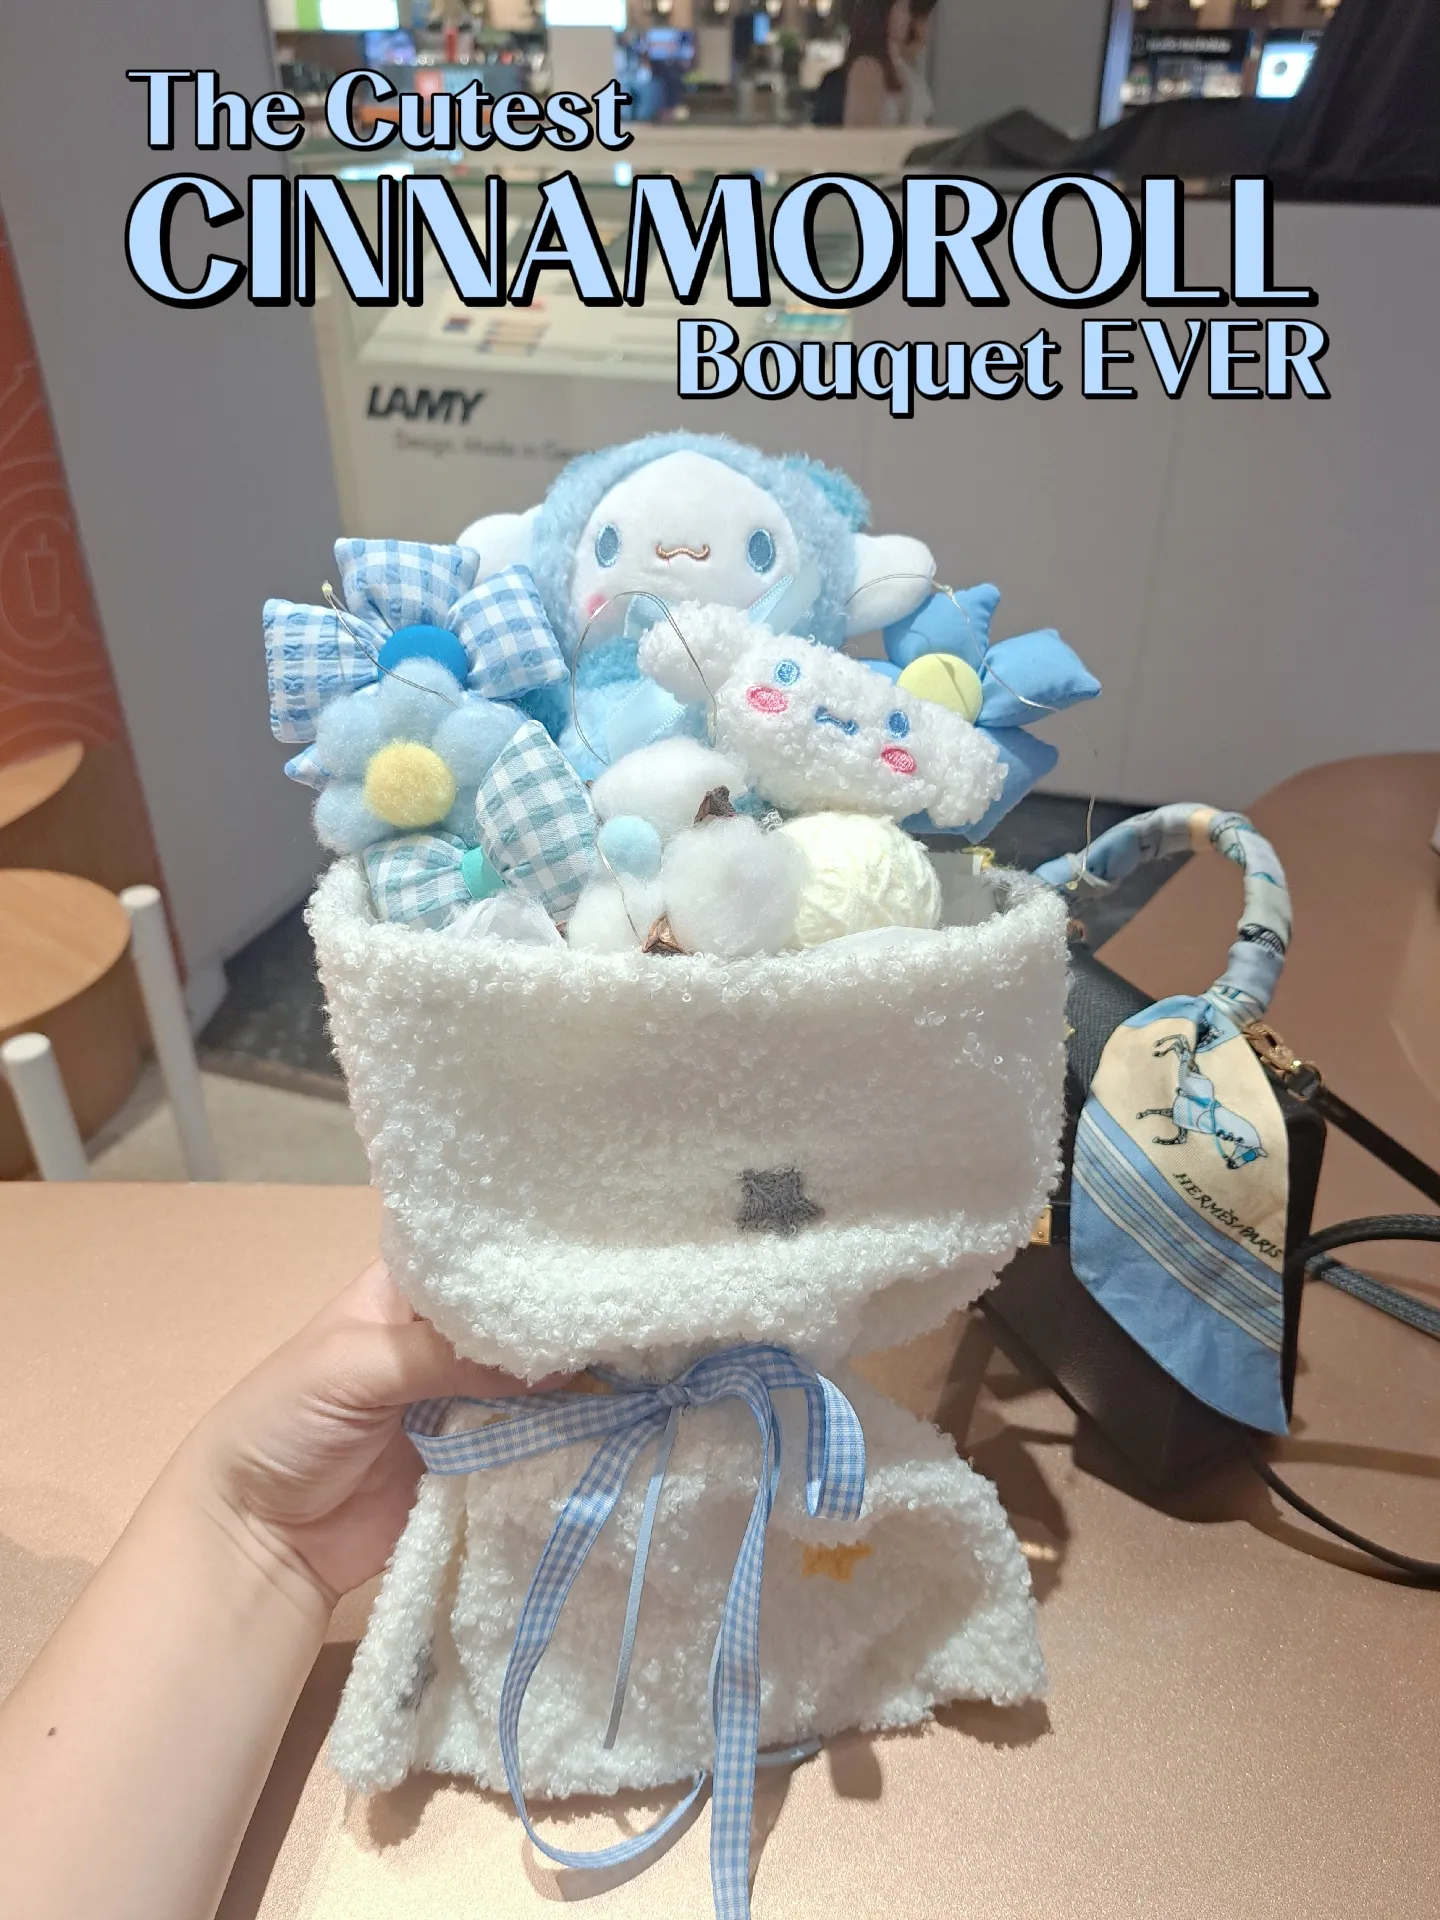 I love cinnamoroll! But I only want the hook. $40 dollars is too